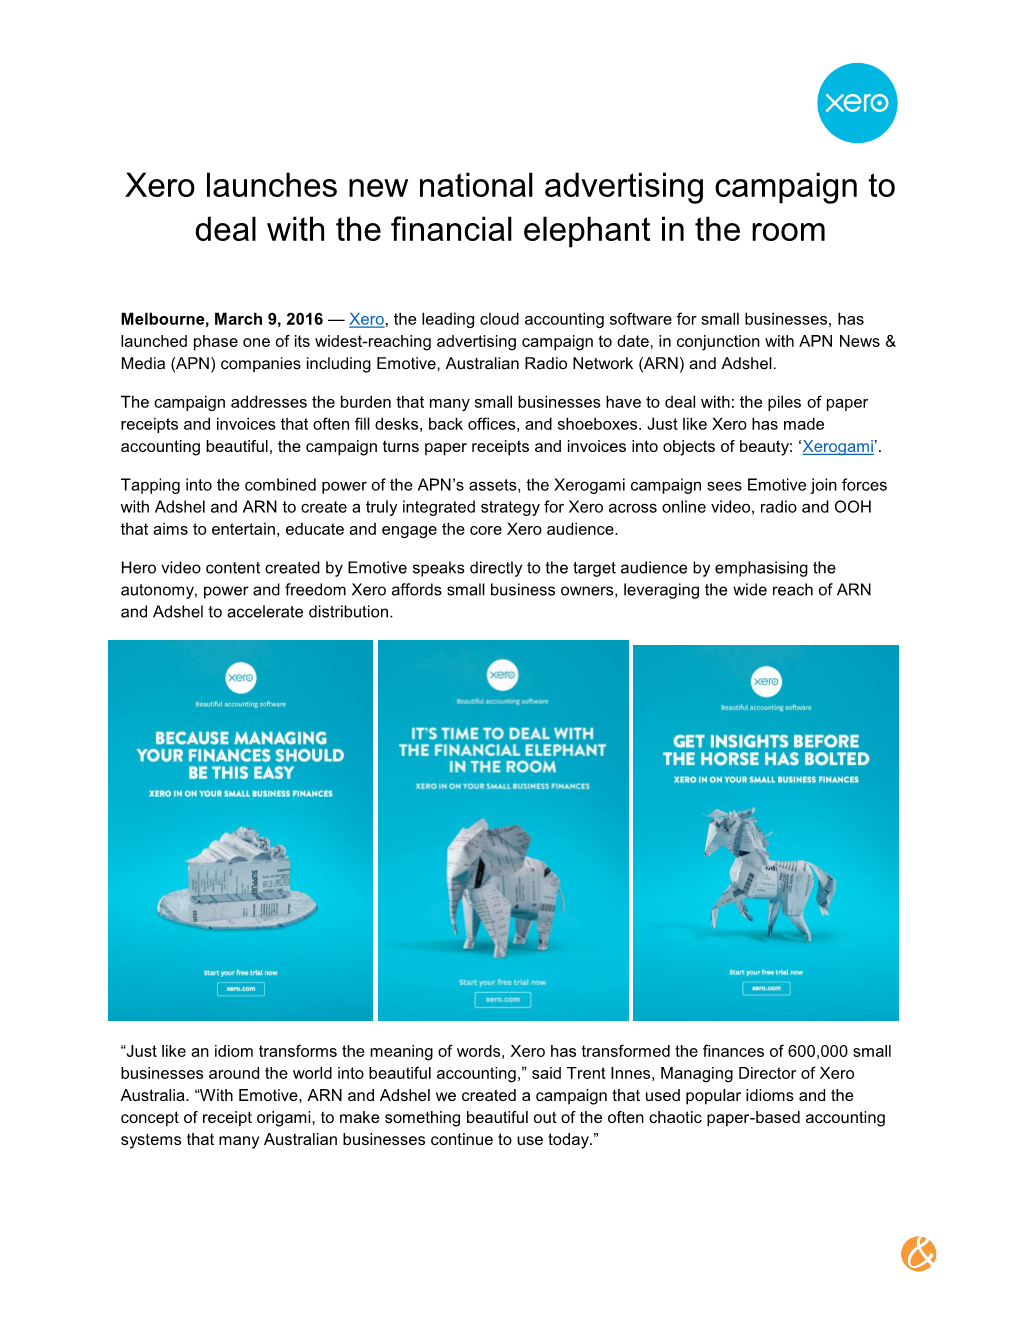 Xero Launches New National Advertising Campaign to Deal with the Financial Elephant in the Room